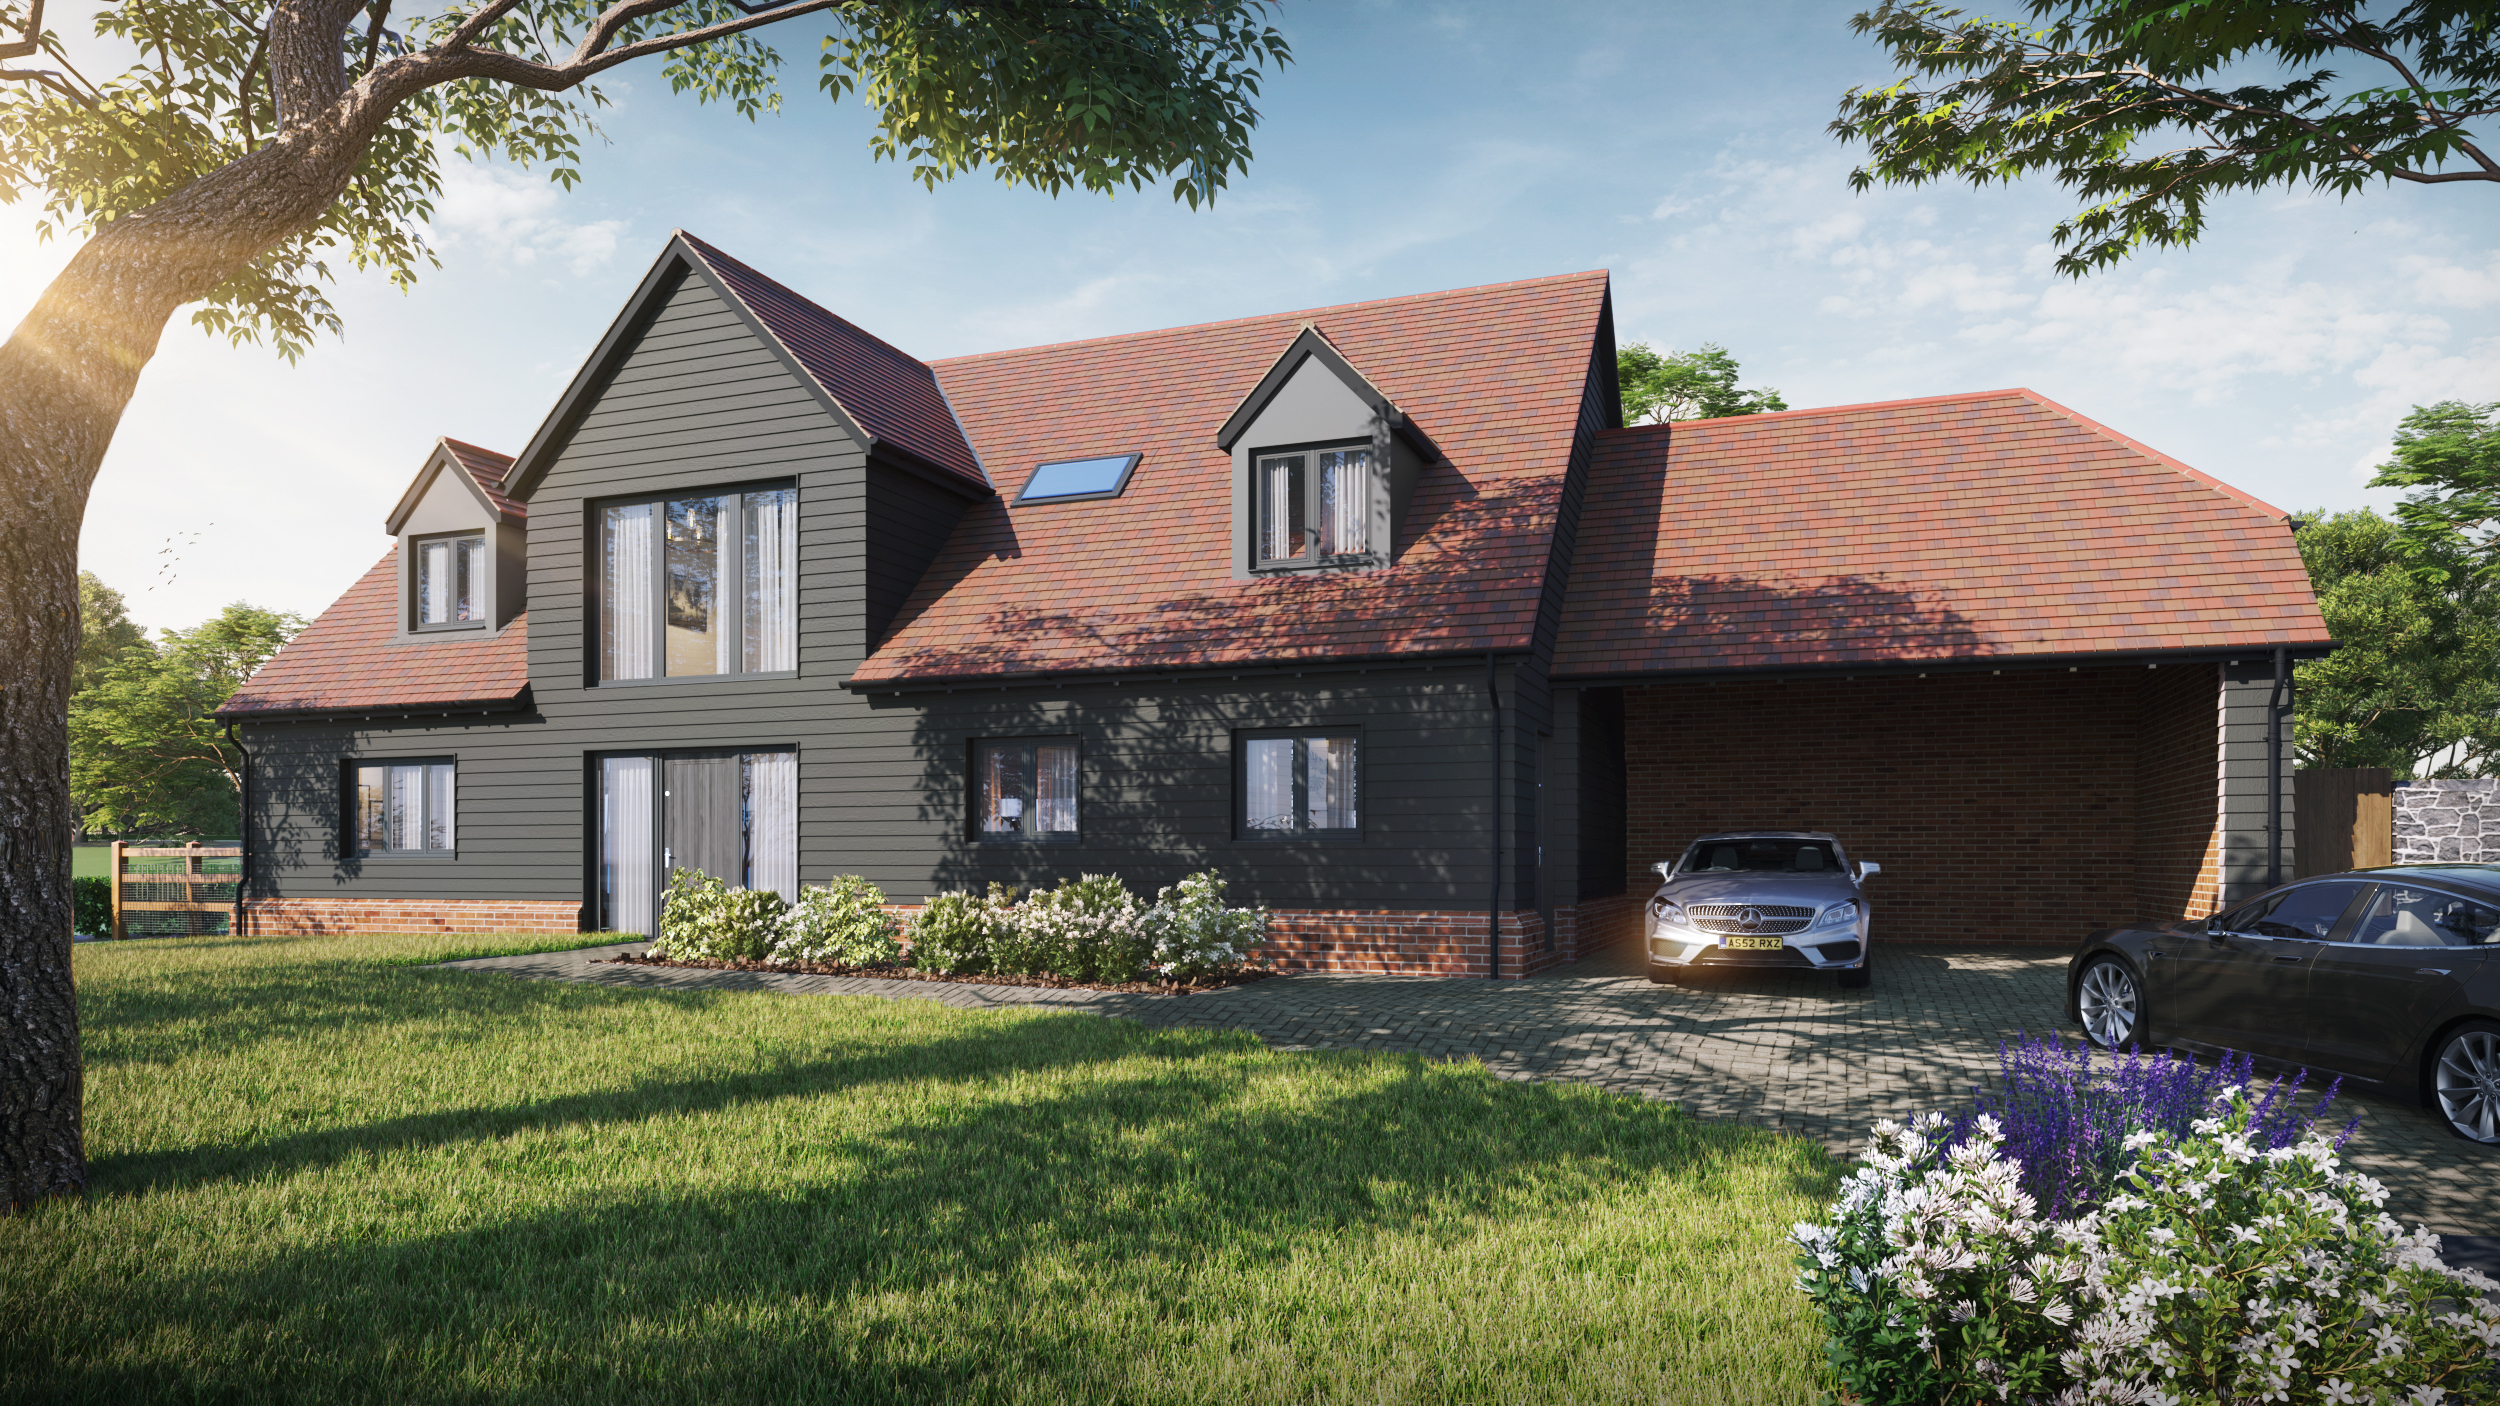 A CGI of a detached house with red roof tiles and grey cladding.